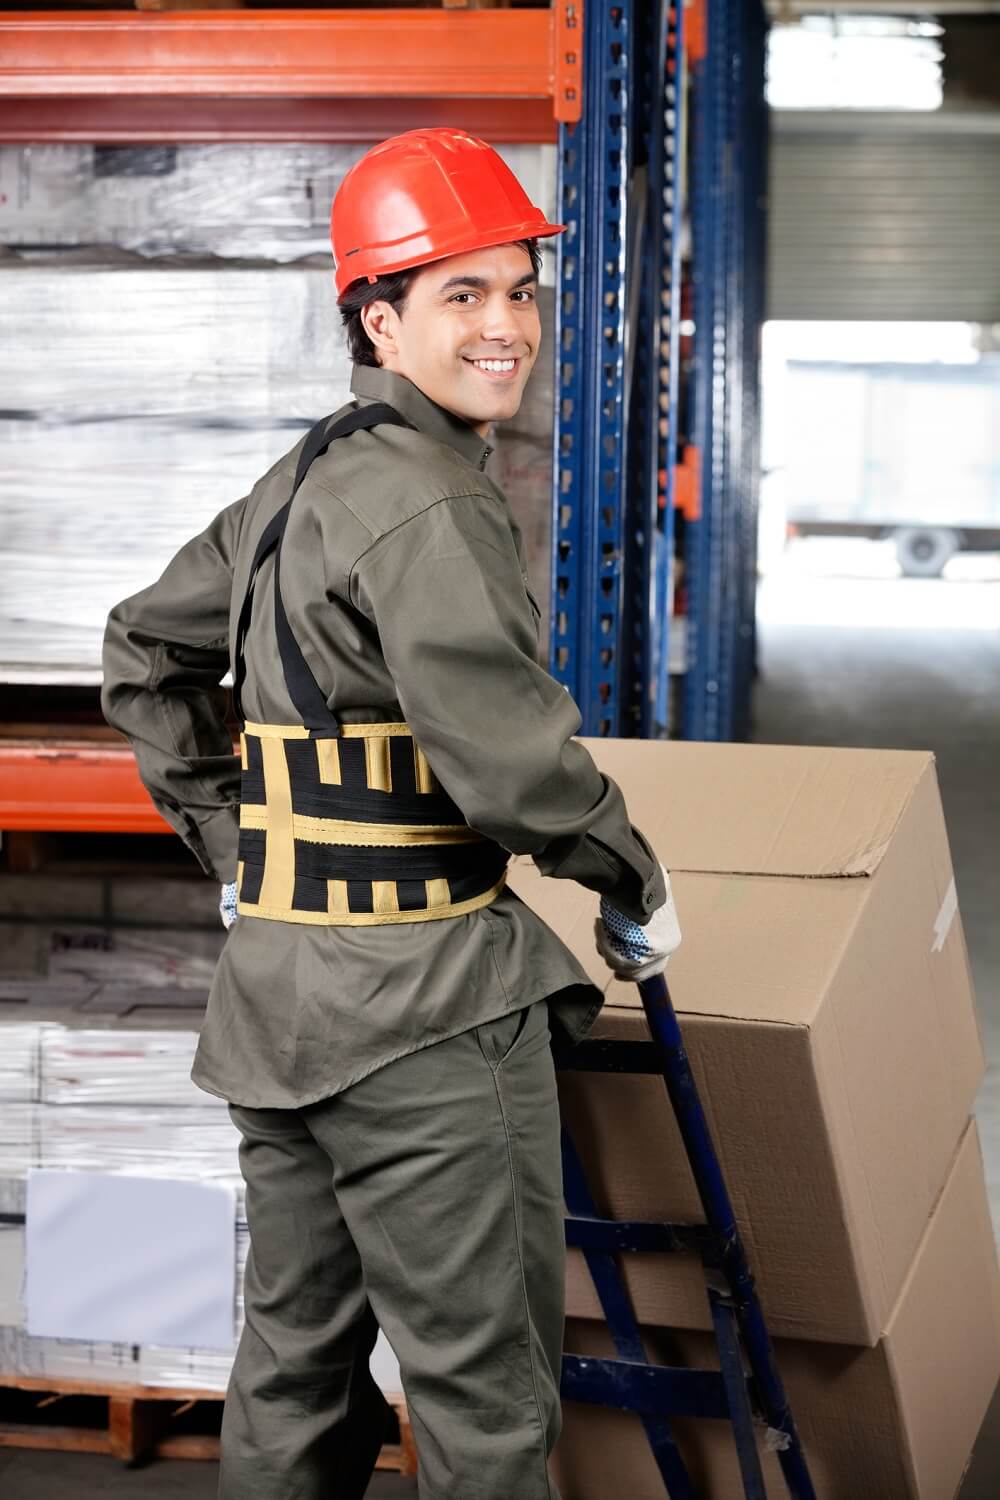 What are some of the guidelines around using back support belts in the  workplace?